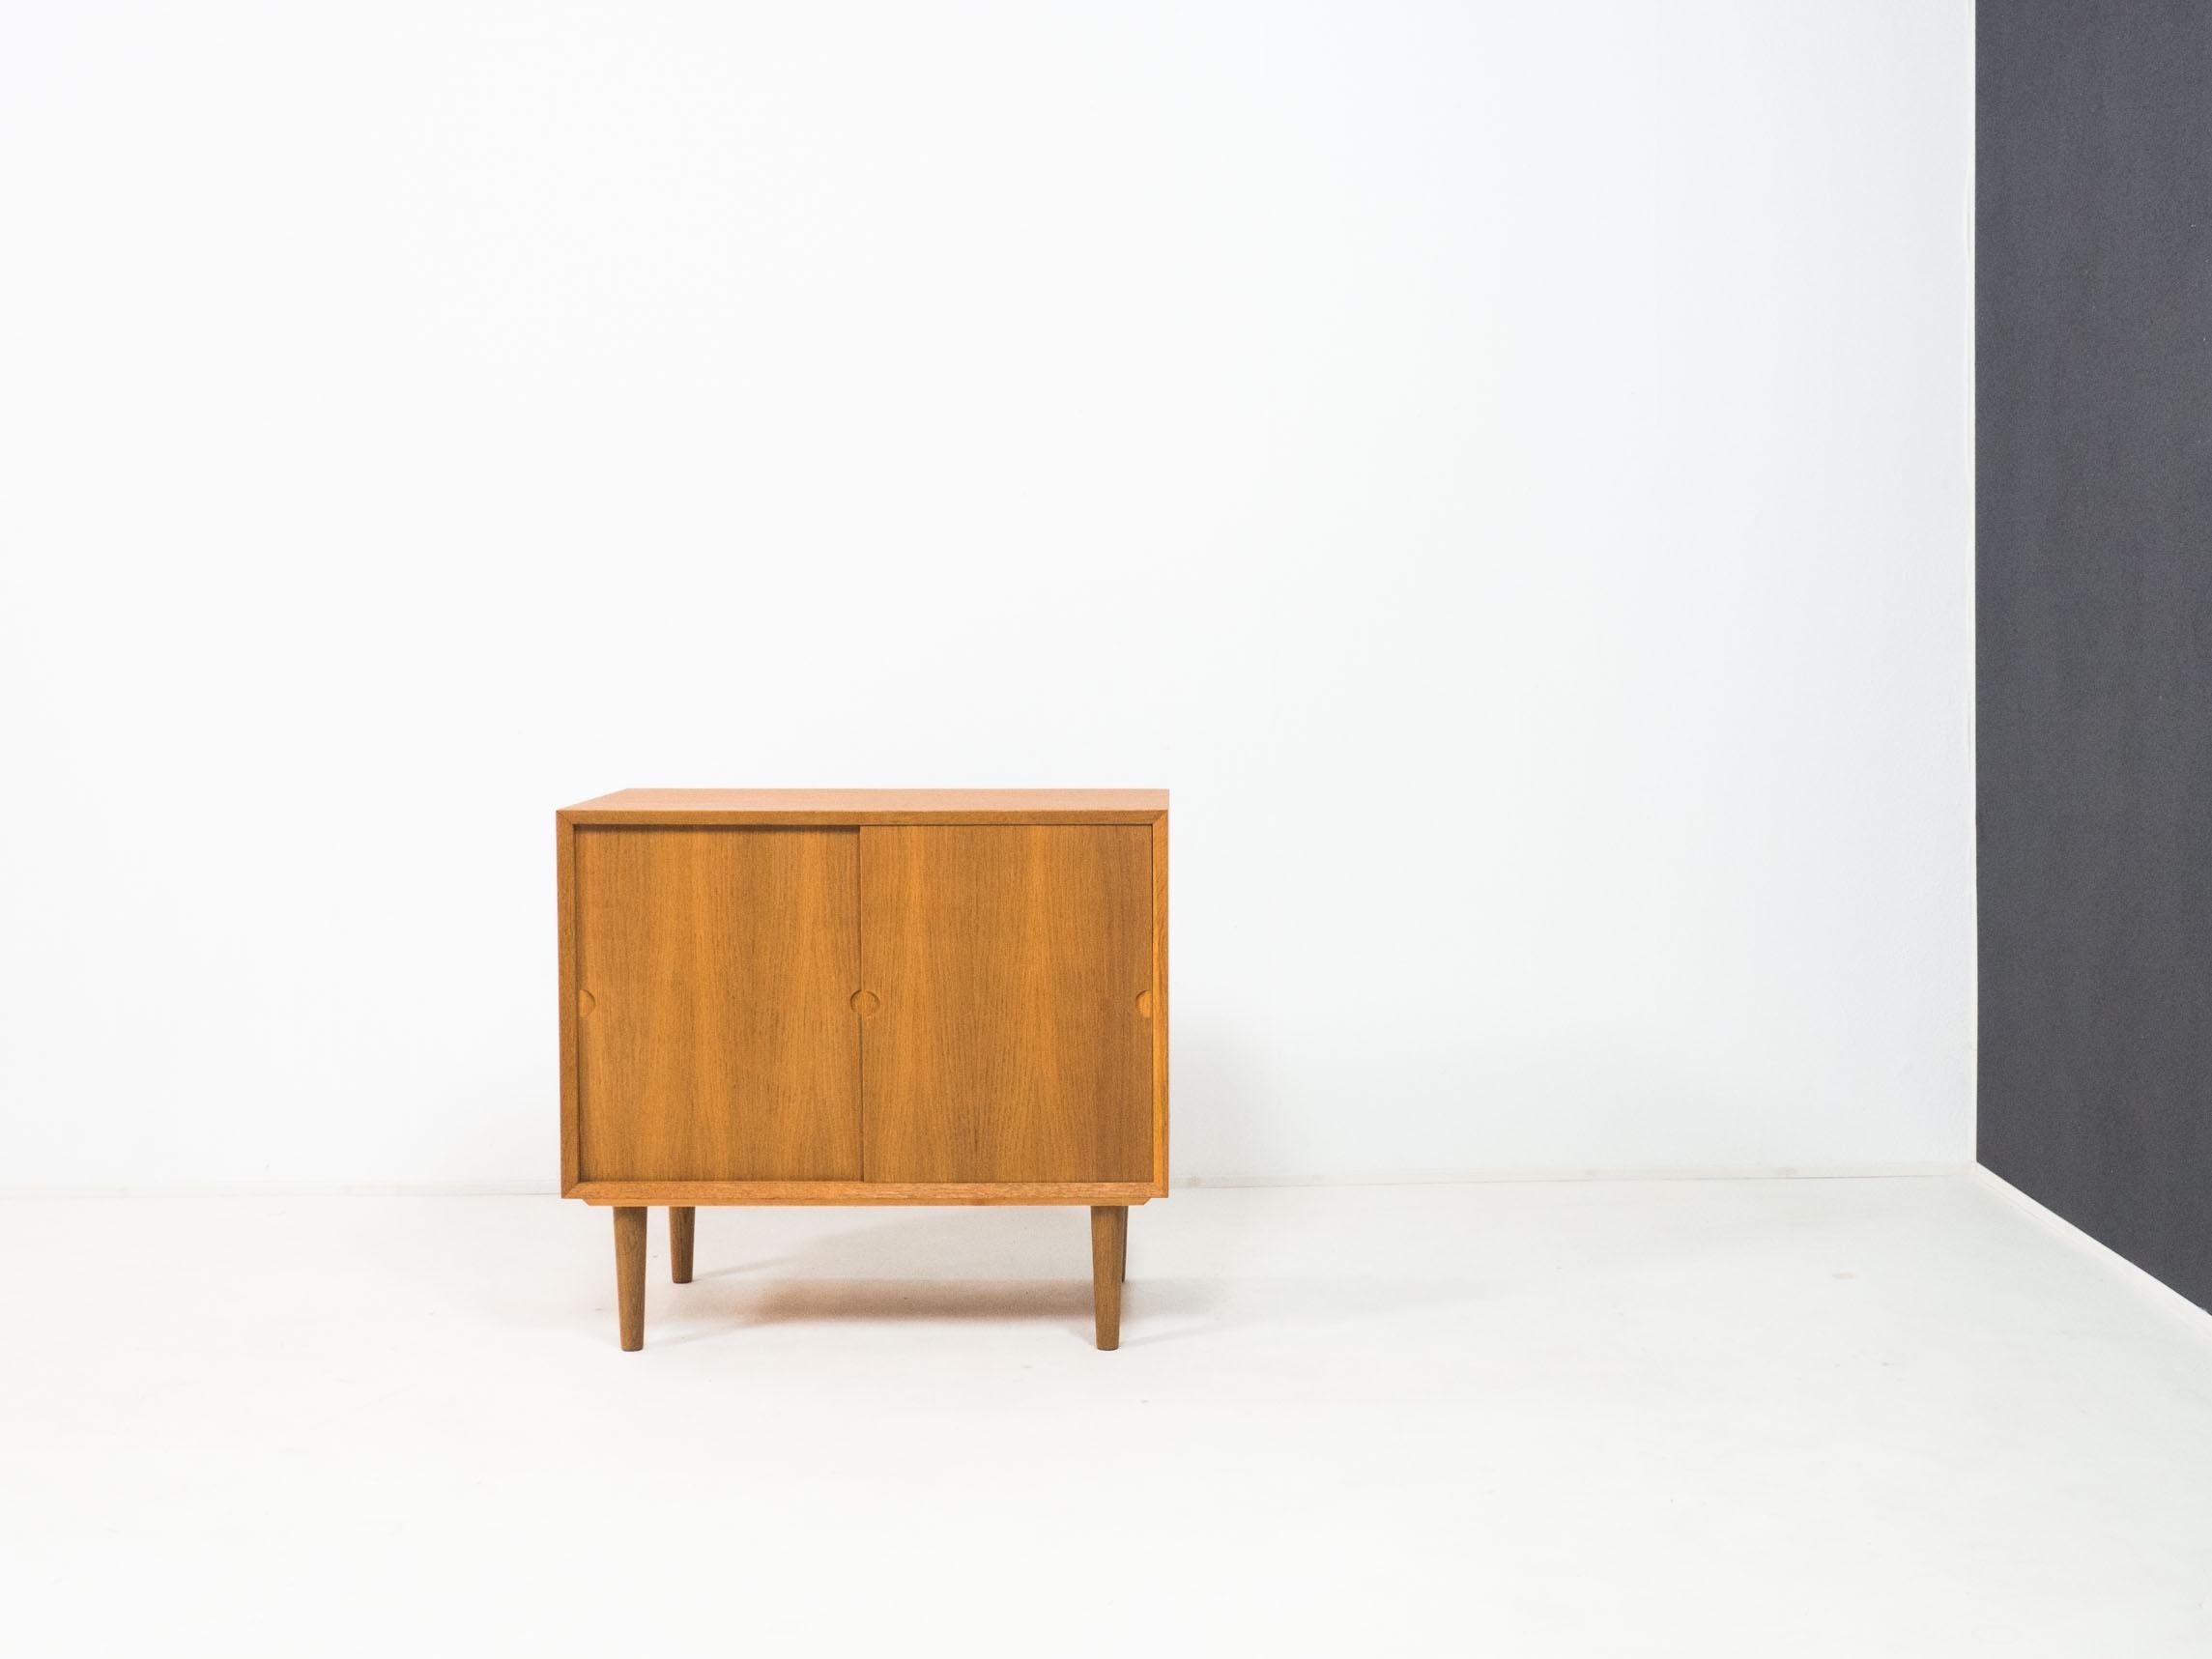 Sliding door cabinet with tapered feet designed by Poul Cadovius for Cado, Denmark in the 1960s.

This cabinet has oak veneered sides, top and sliding doors and has solid oak edges and feet.

The condition of the cabinet is good. There are